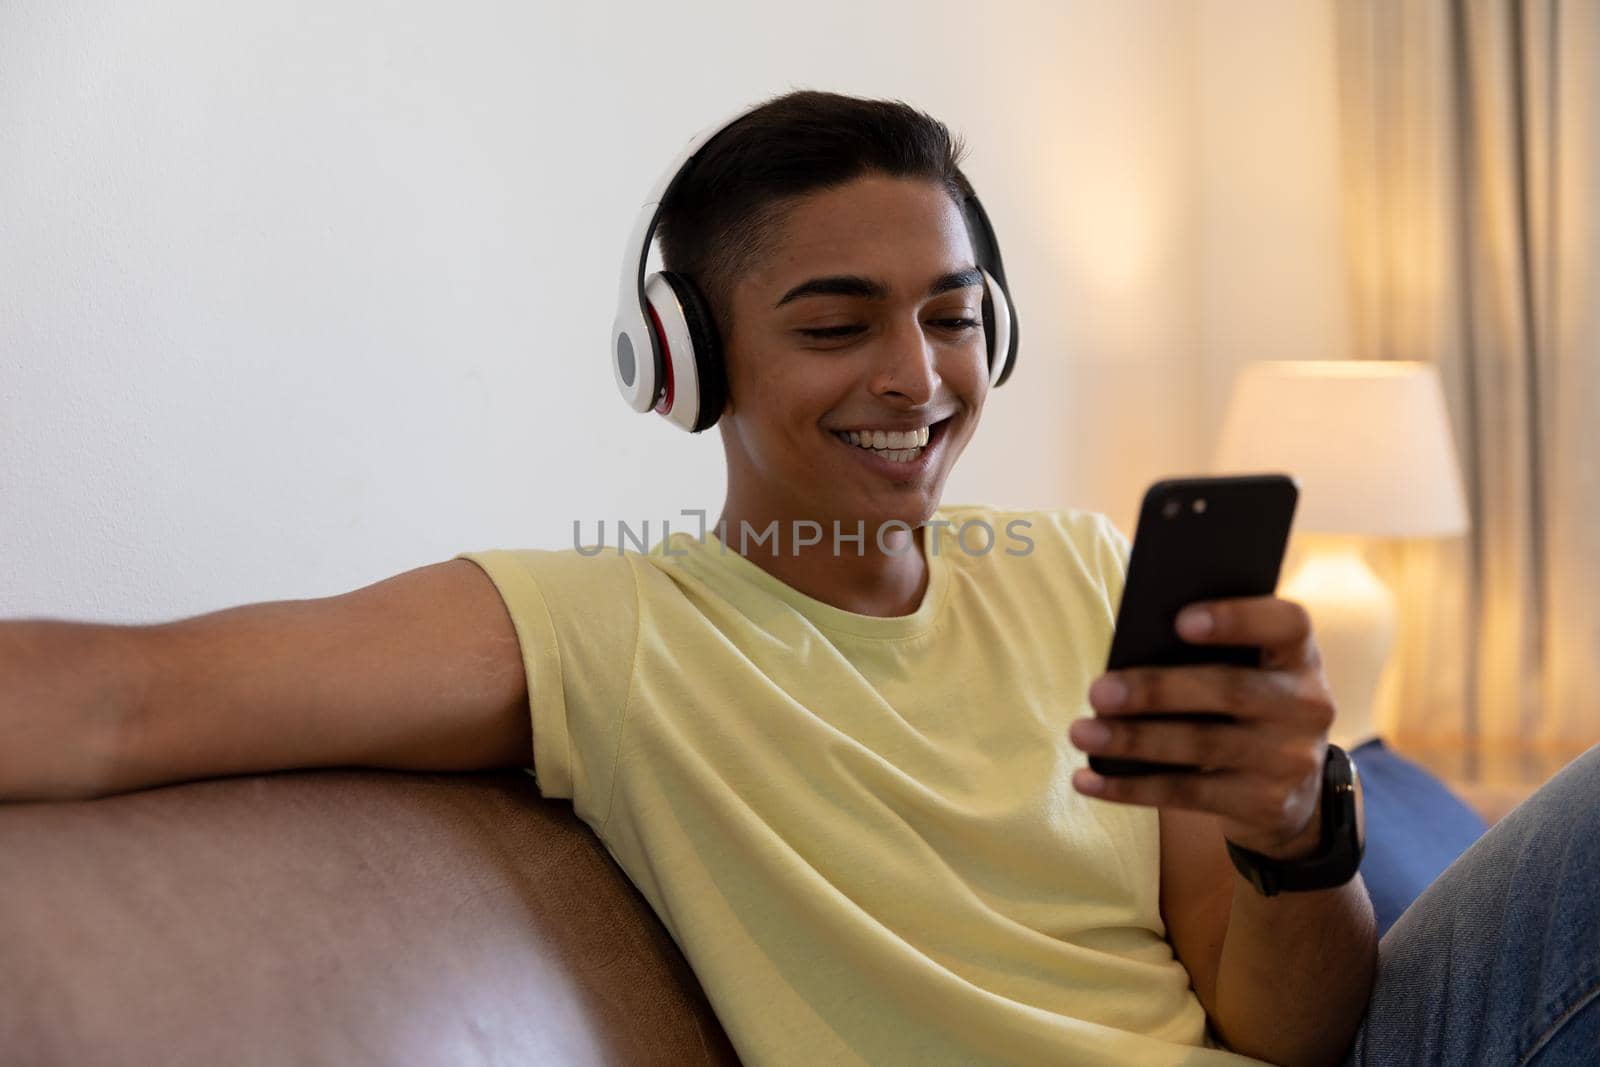 Mixed race man sitting on couch wearing headphones smiling and using smartphone. staying at home in isolation during quarantine lockdown.